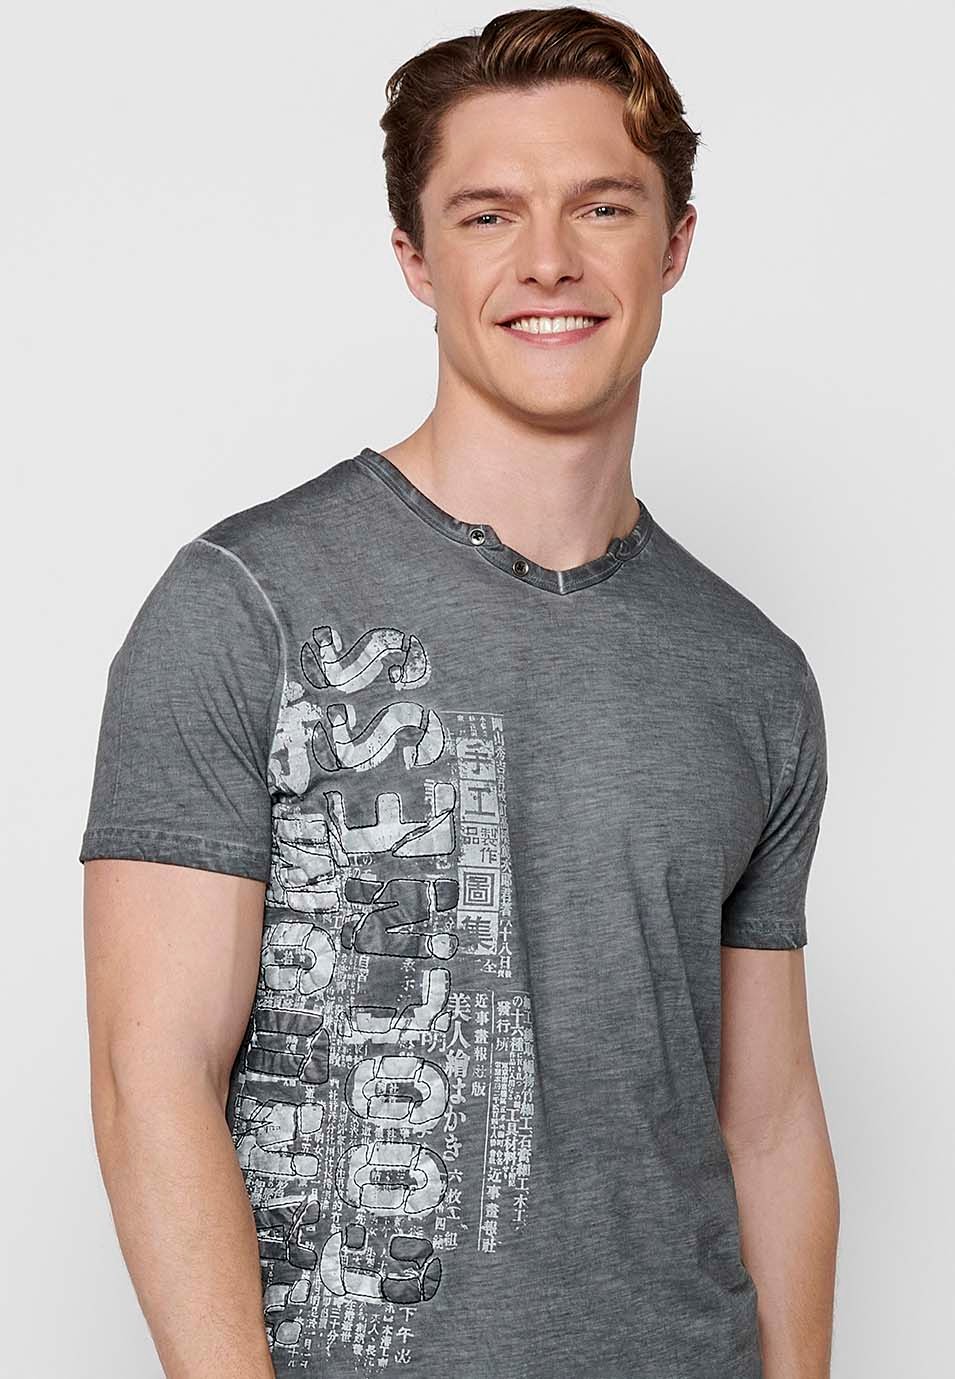 Short-sleeved cotton t-shirt, V-neck with button decoration, gray color for men